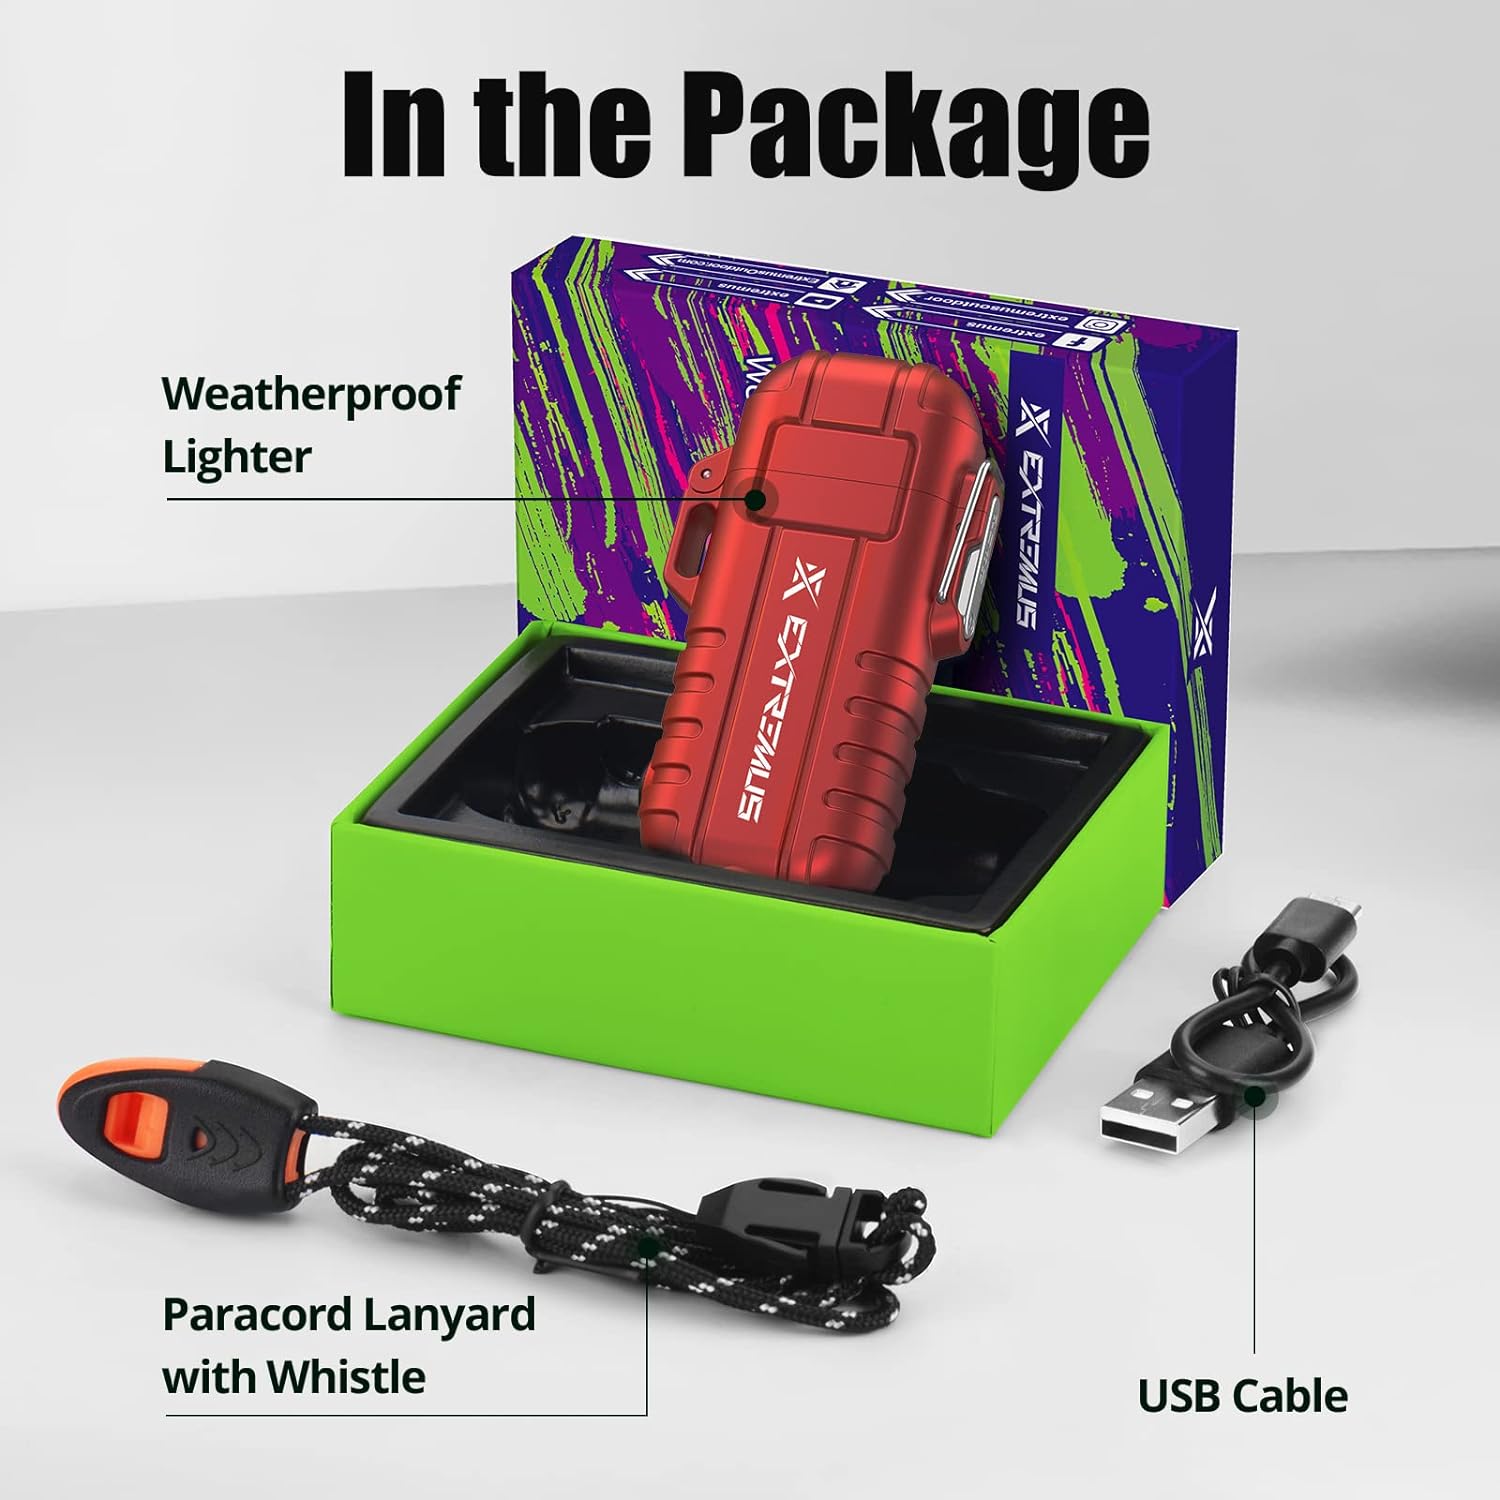 Extremus Blaze 360 Windproof Lighter, Waterproof Lighter with Flashlight, USB Rechargeable Flameless Lighter, Dual Arc Plasma Electric Lighter with Survival Whistle & Lanyard Camping Tactical Gear